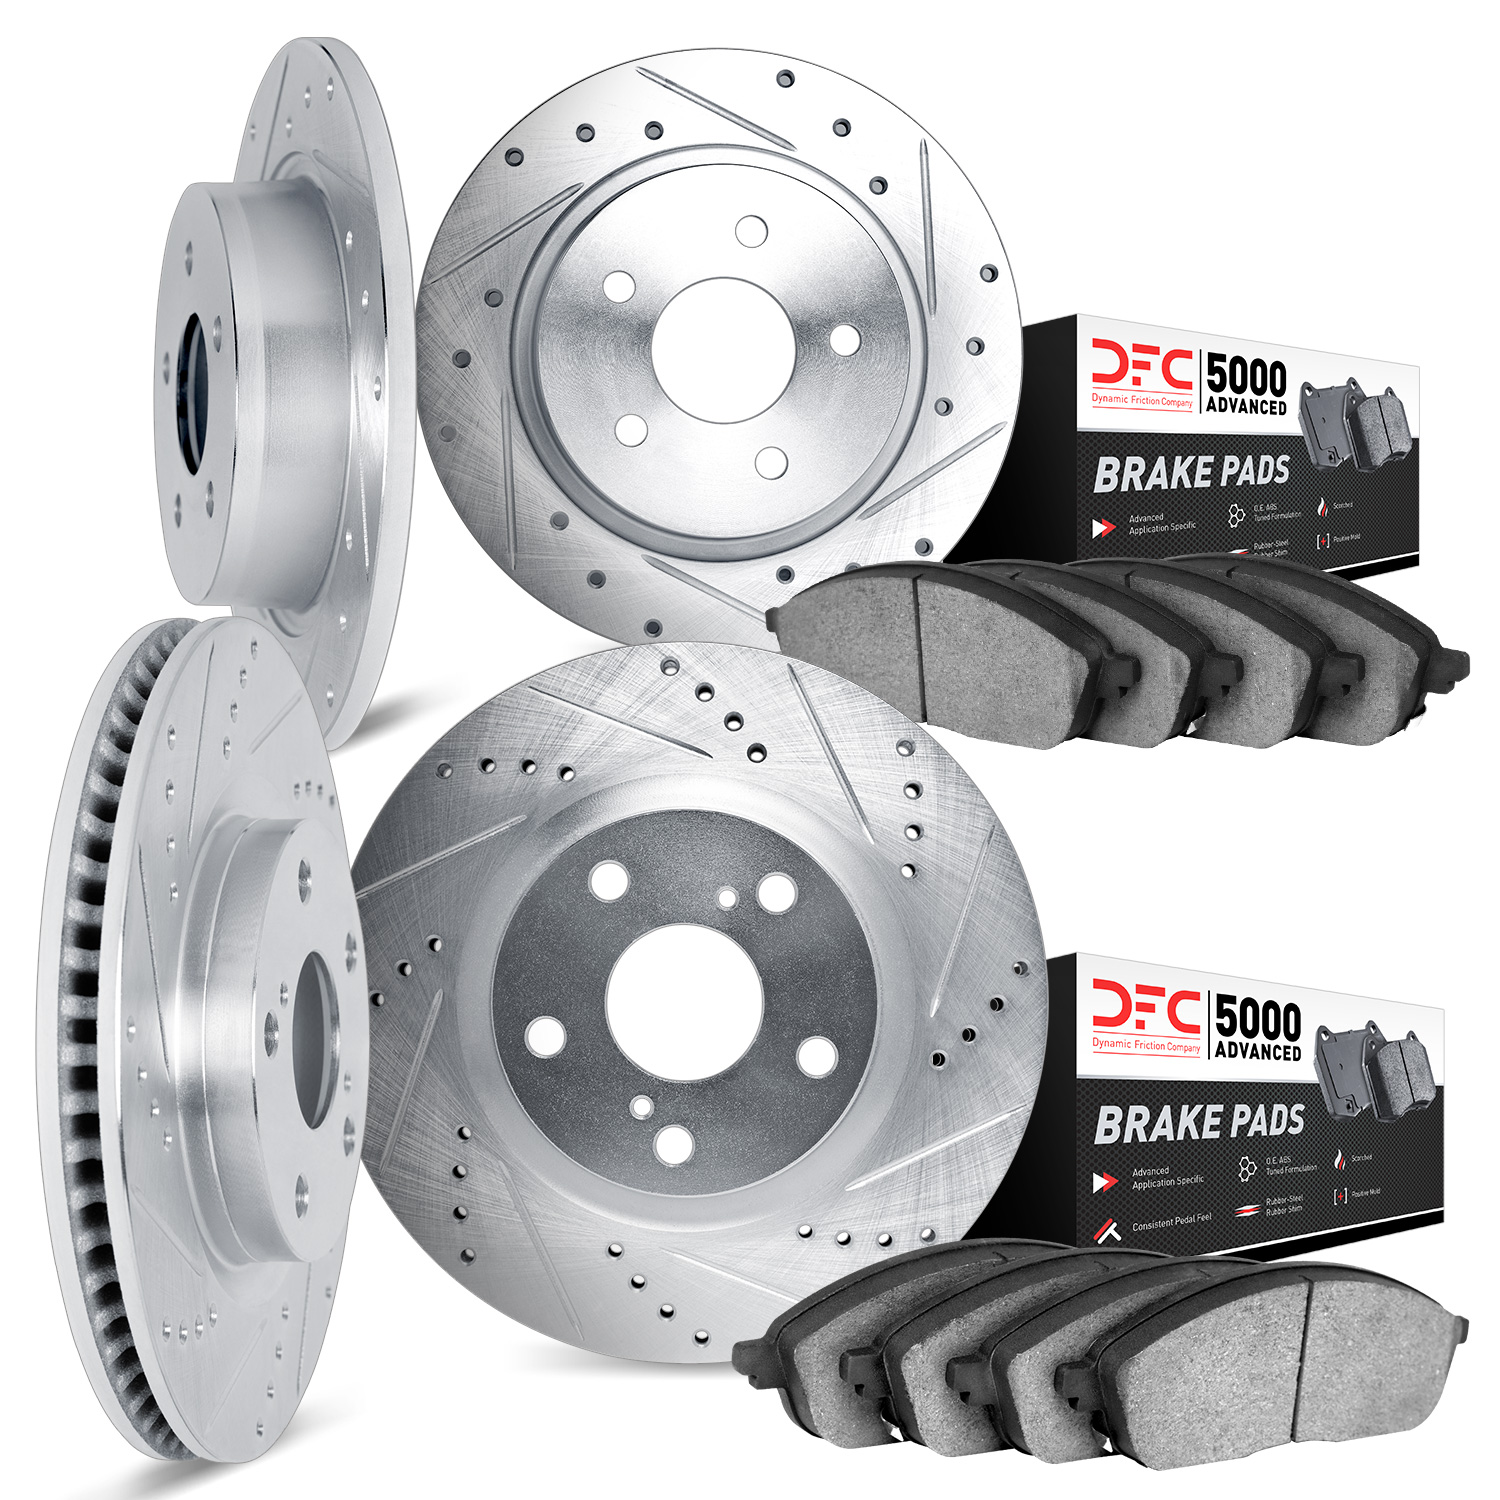 7504-76139 Drilled/Slotted Brake Rotors w/5000 Advanced Brake Pads Kit [Silver], 2004-2004 Lexus/Toyota/Scion, Position: Front a